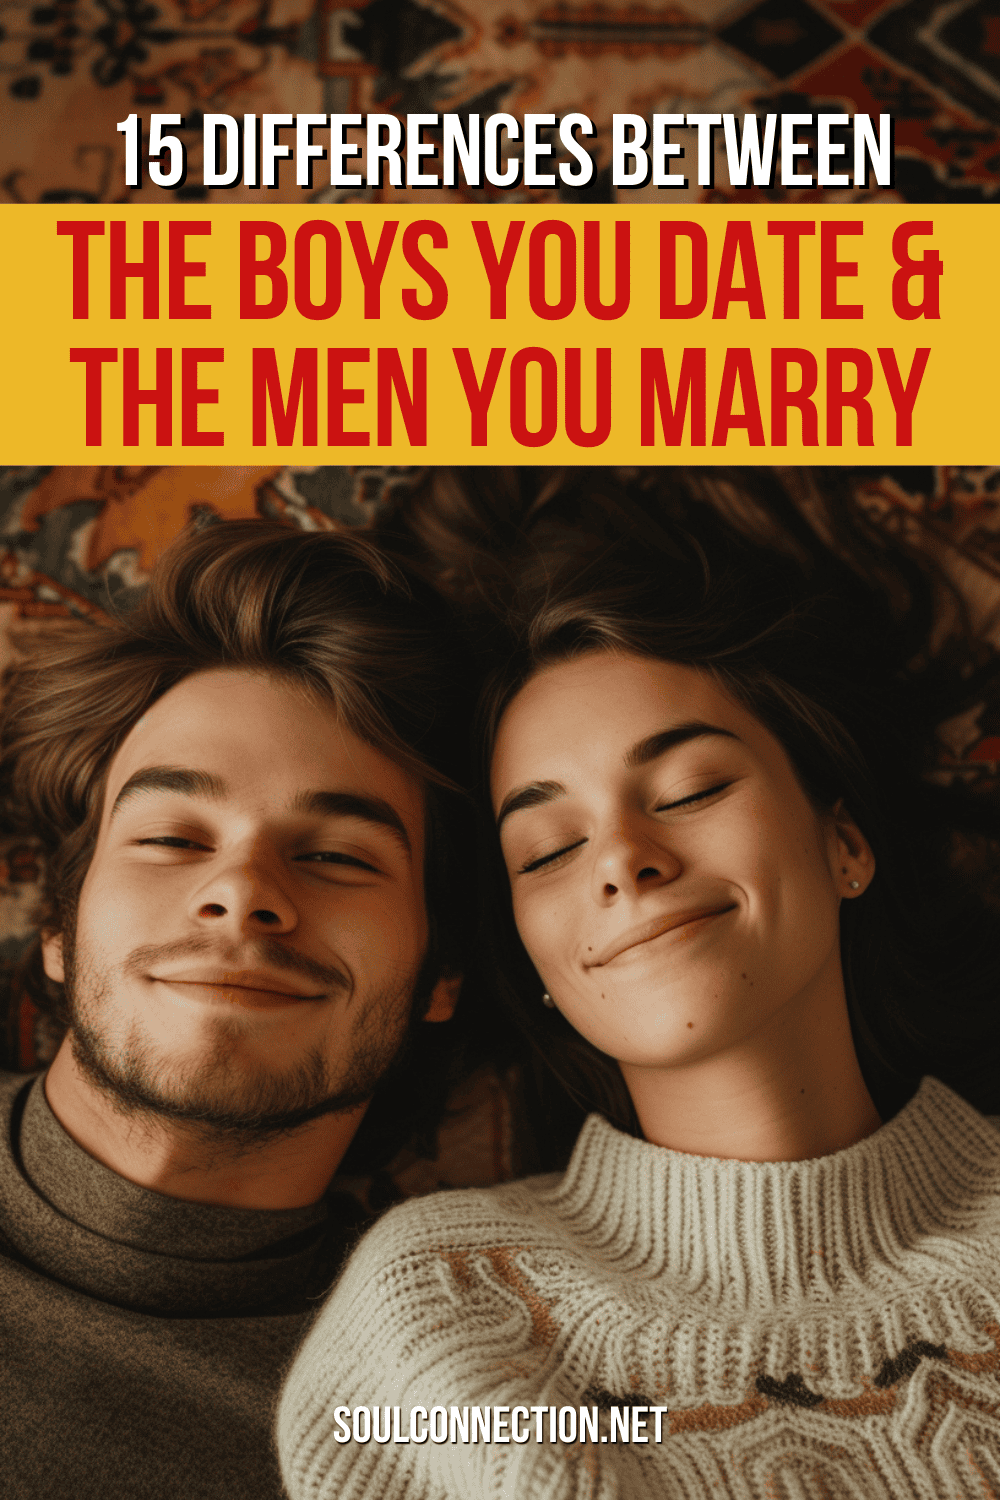 Young couple in cozy setting, highlighting relationship insights between dating boys and marrying men.